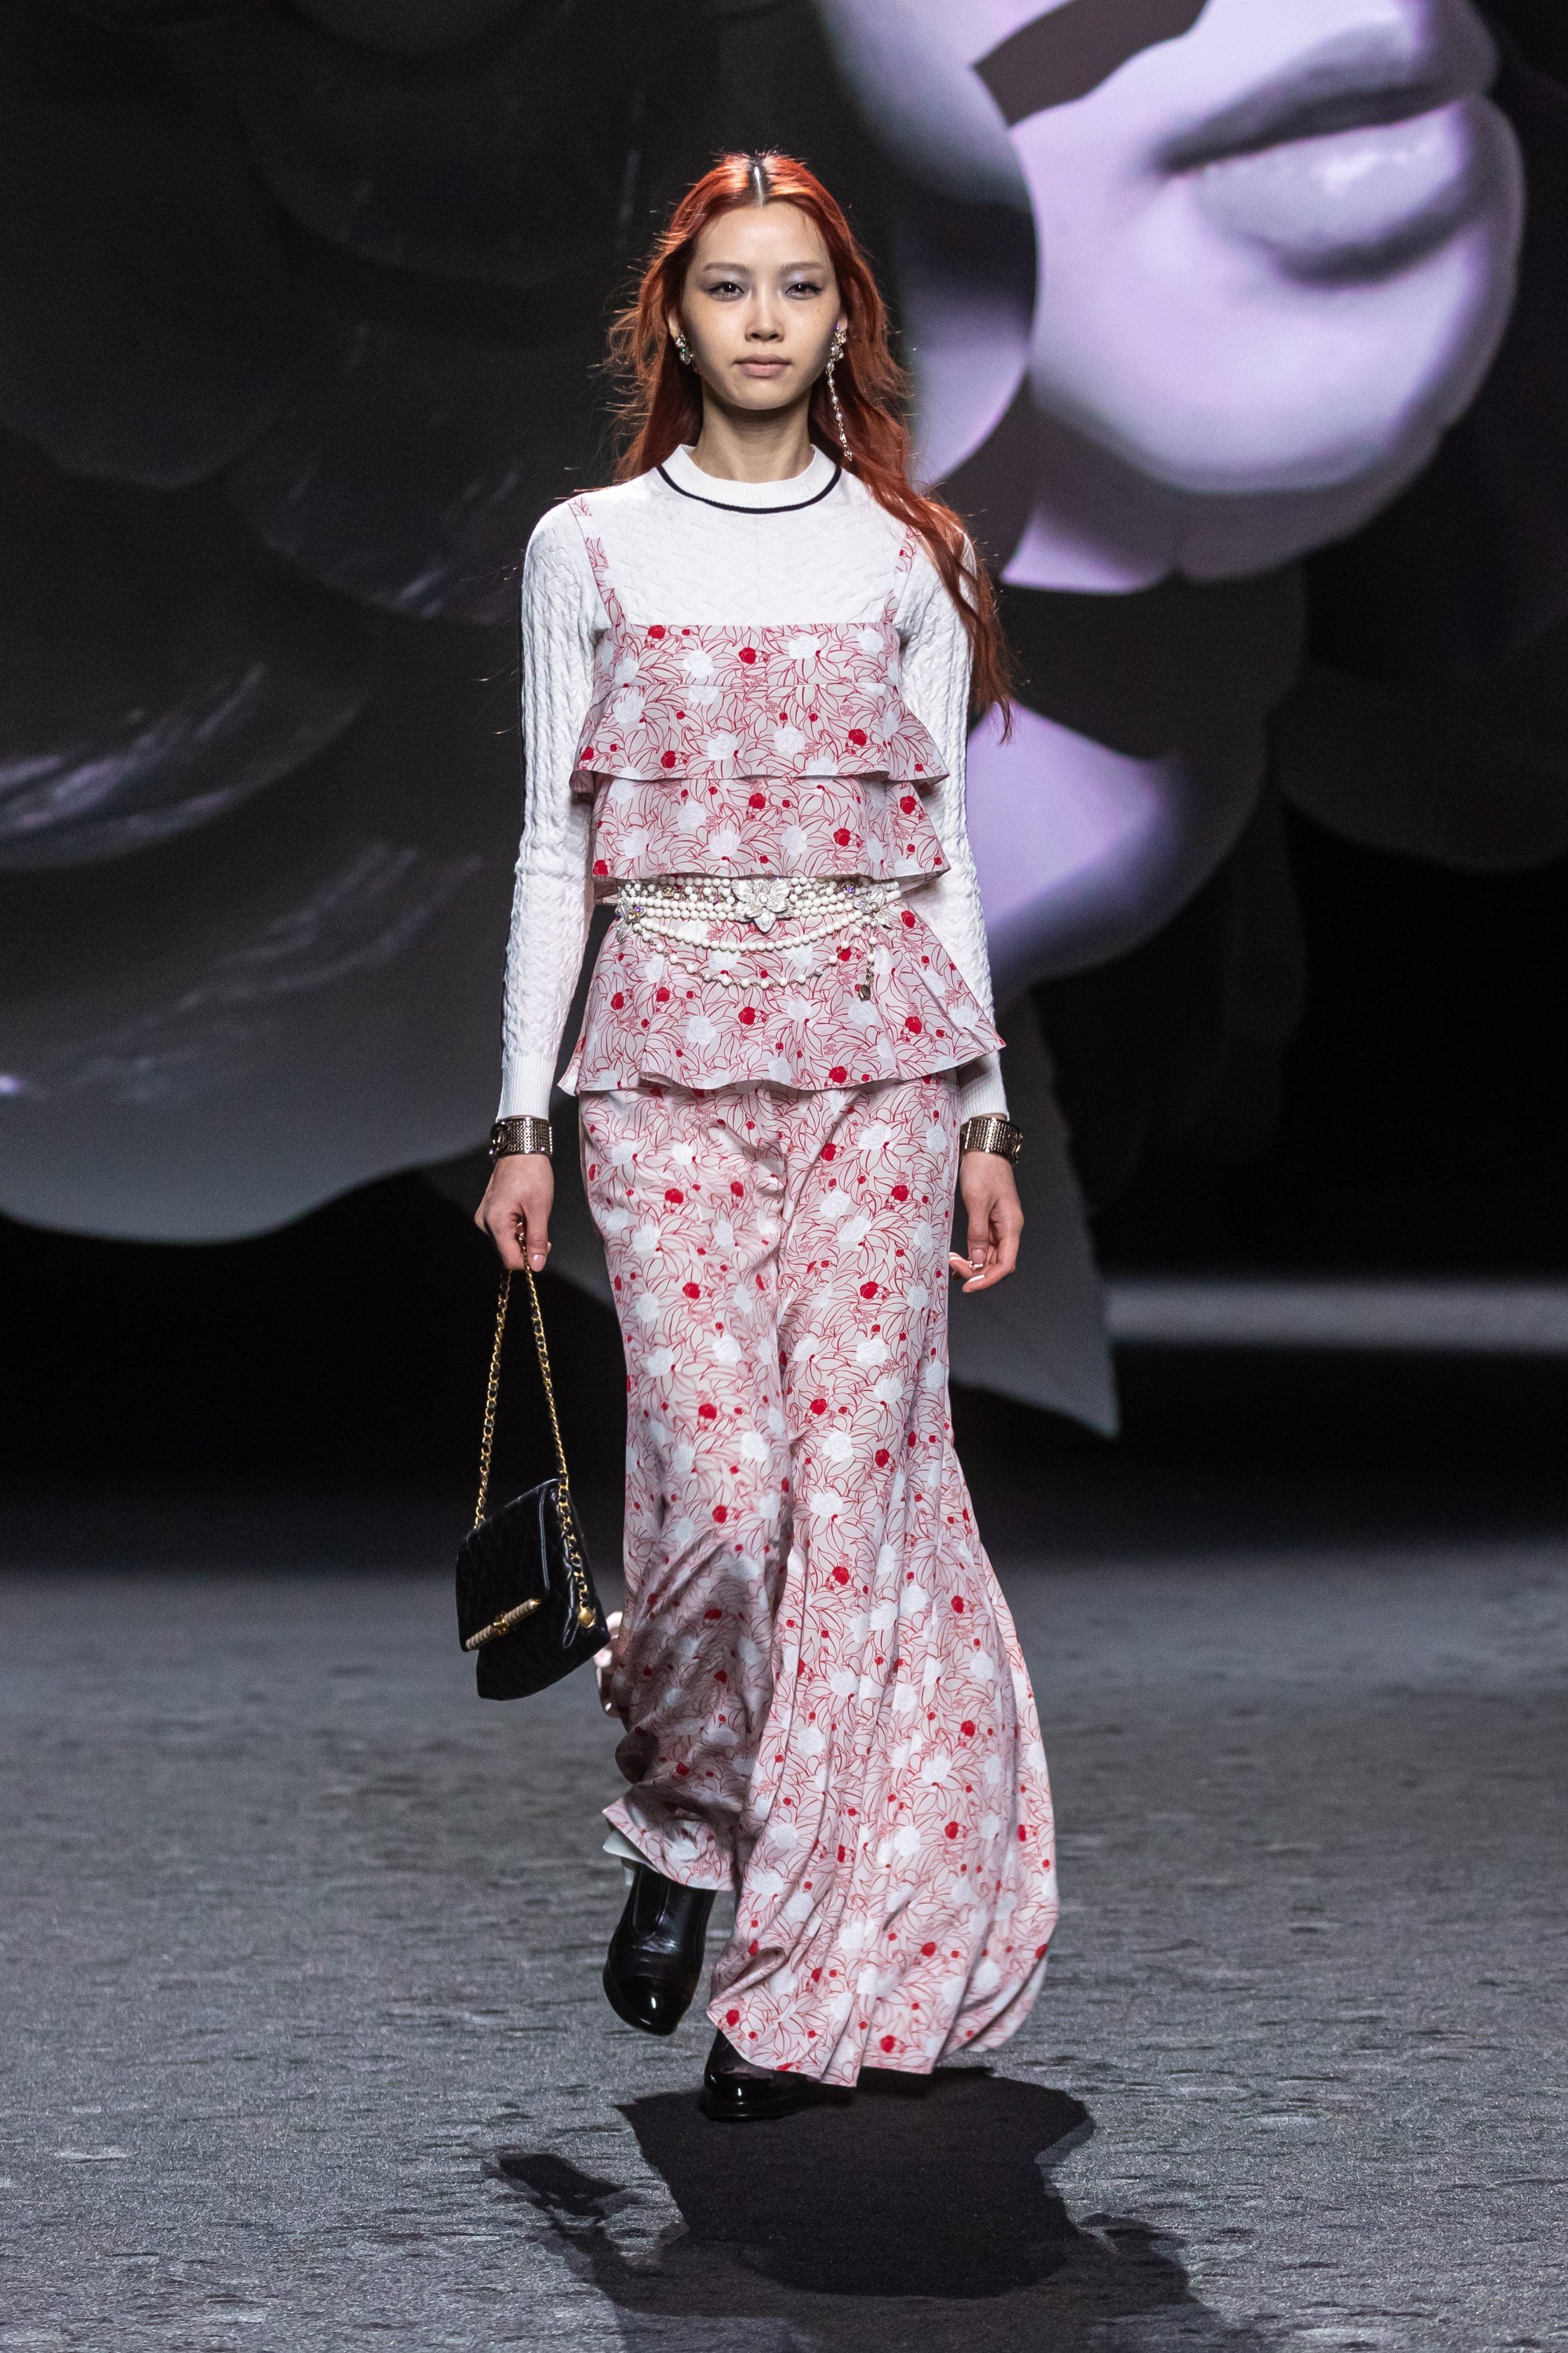 Paris Fashion Week 2023: Chanel closed out with a burst of